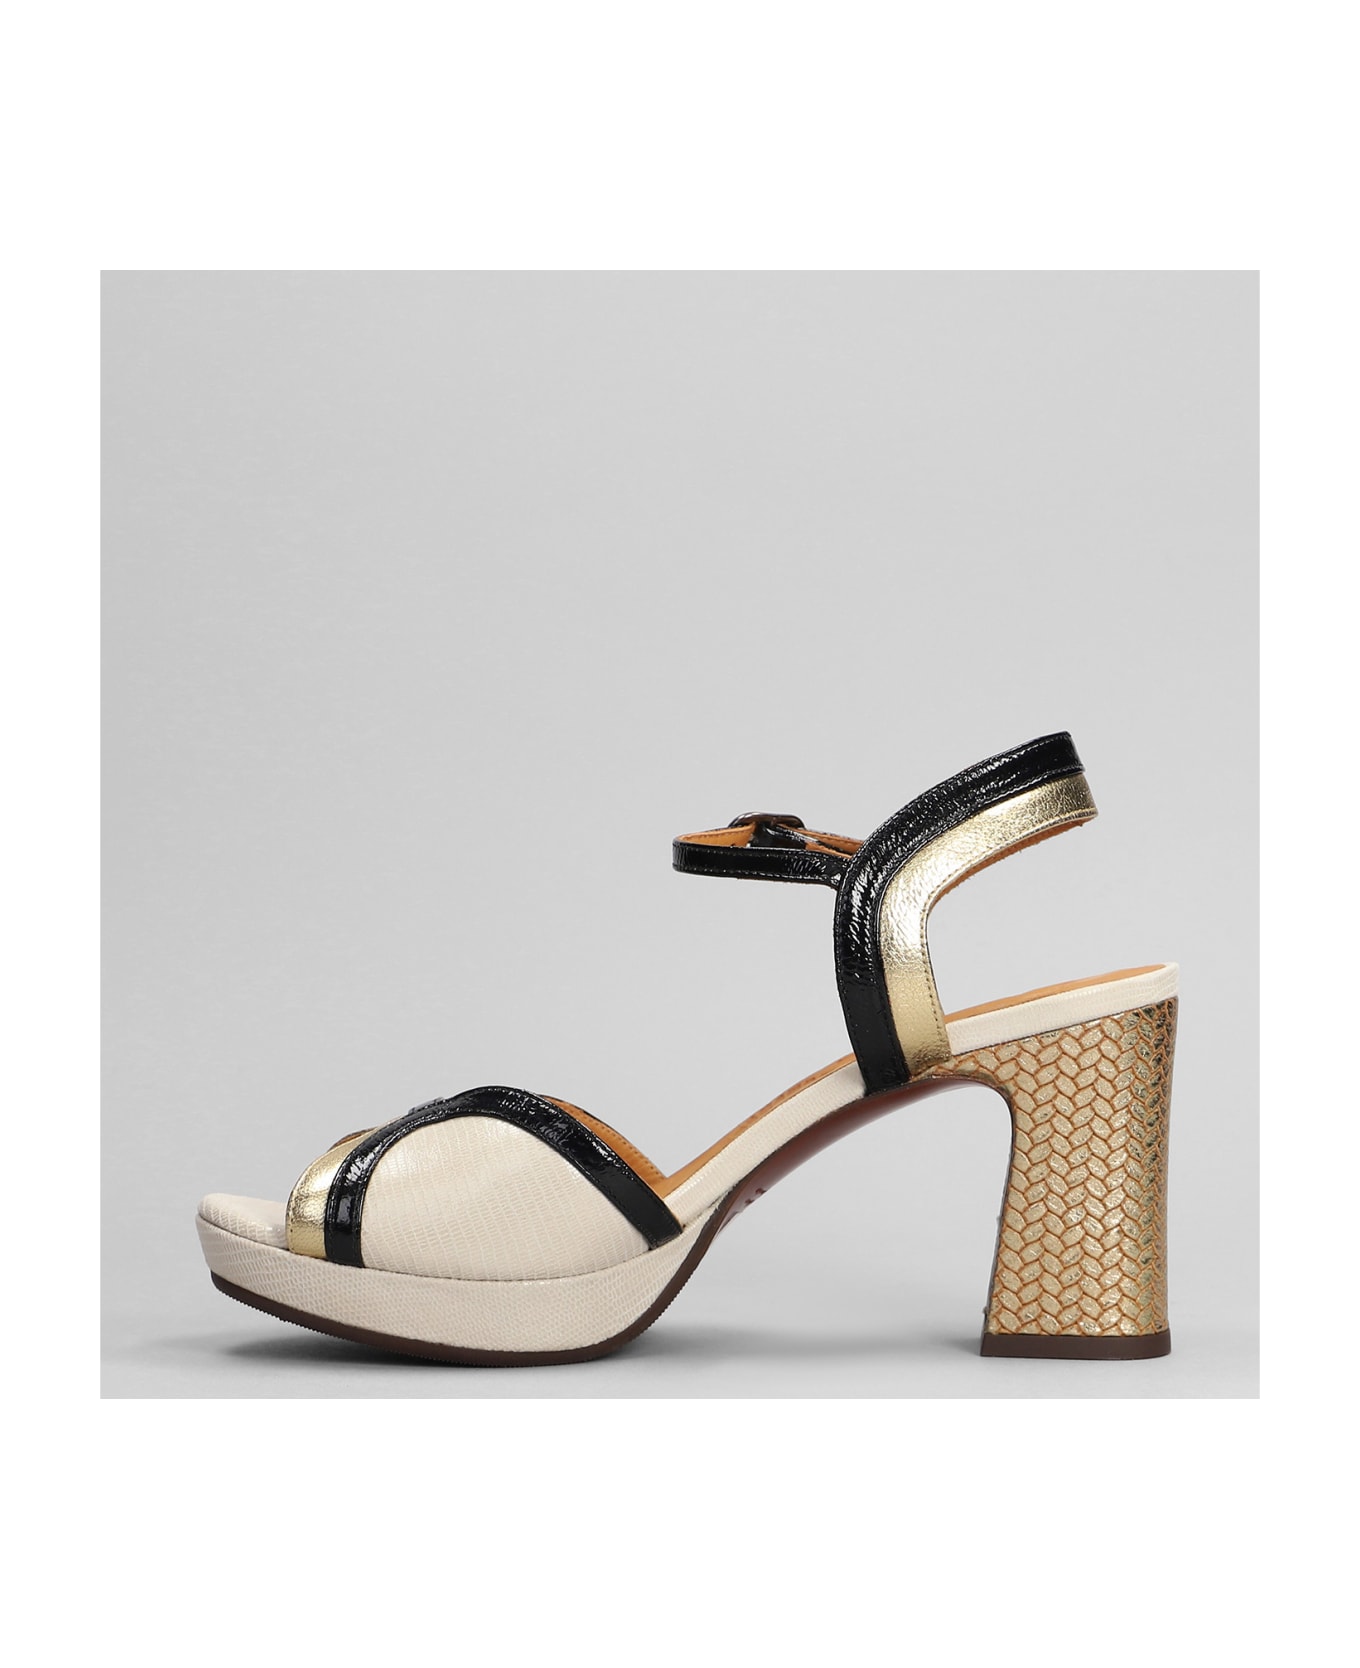 Chie Mihara Keny Sandals In Beige Leather - beige サンダル